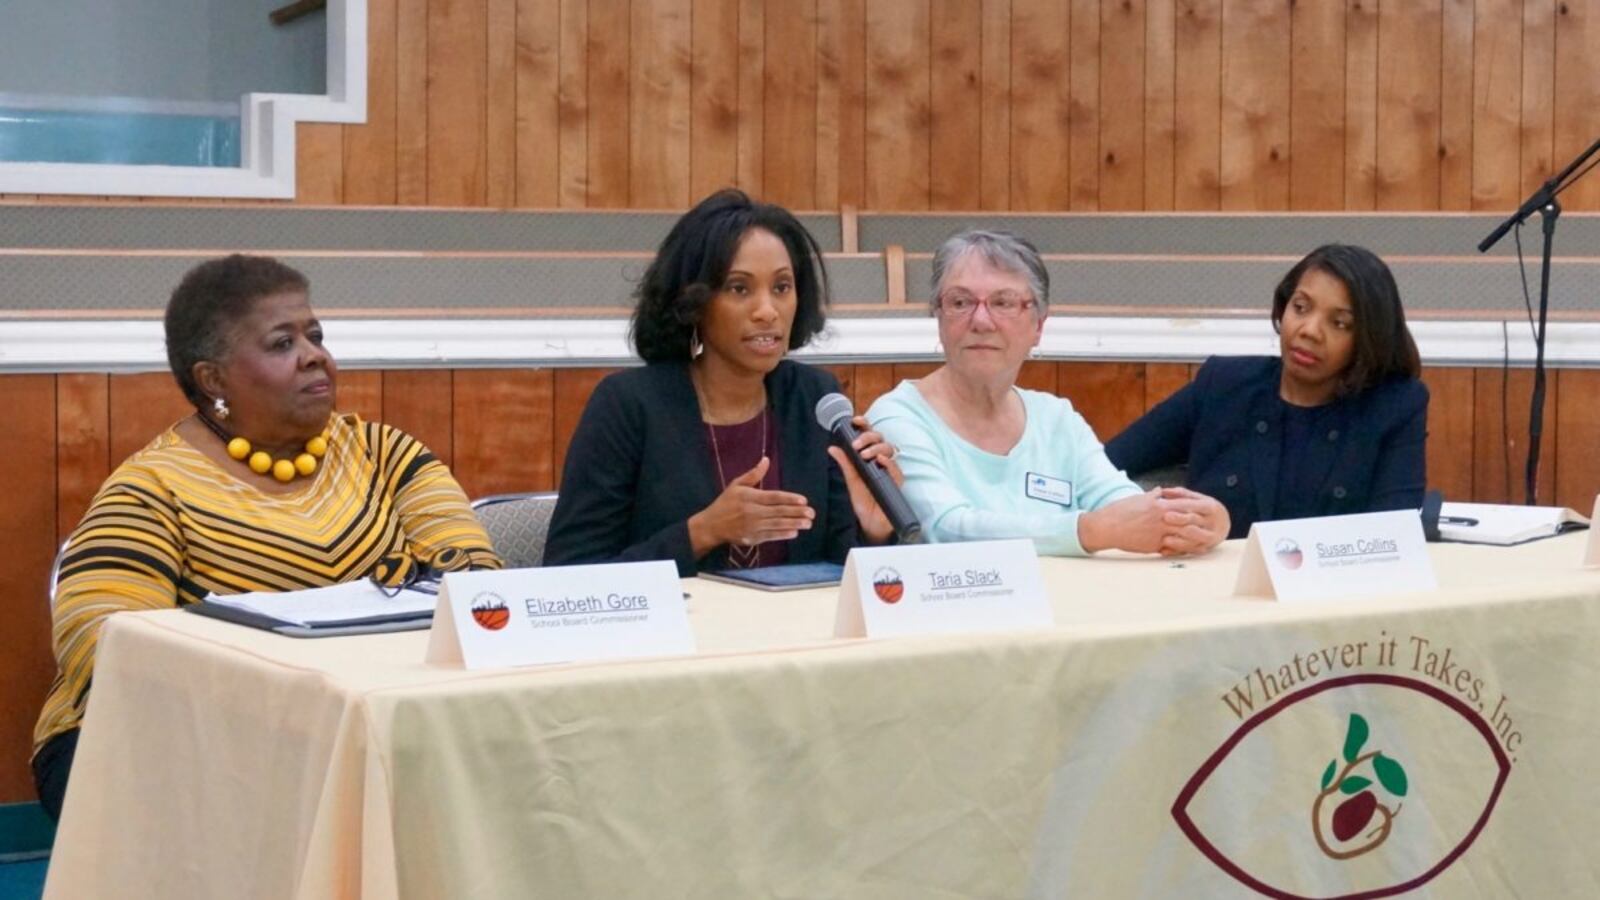 From left to right: Elizabeth Gore, Taria Slack, Susan Collins, and Aleesia Johnson.